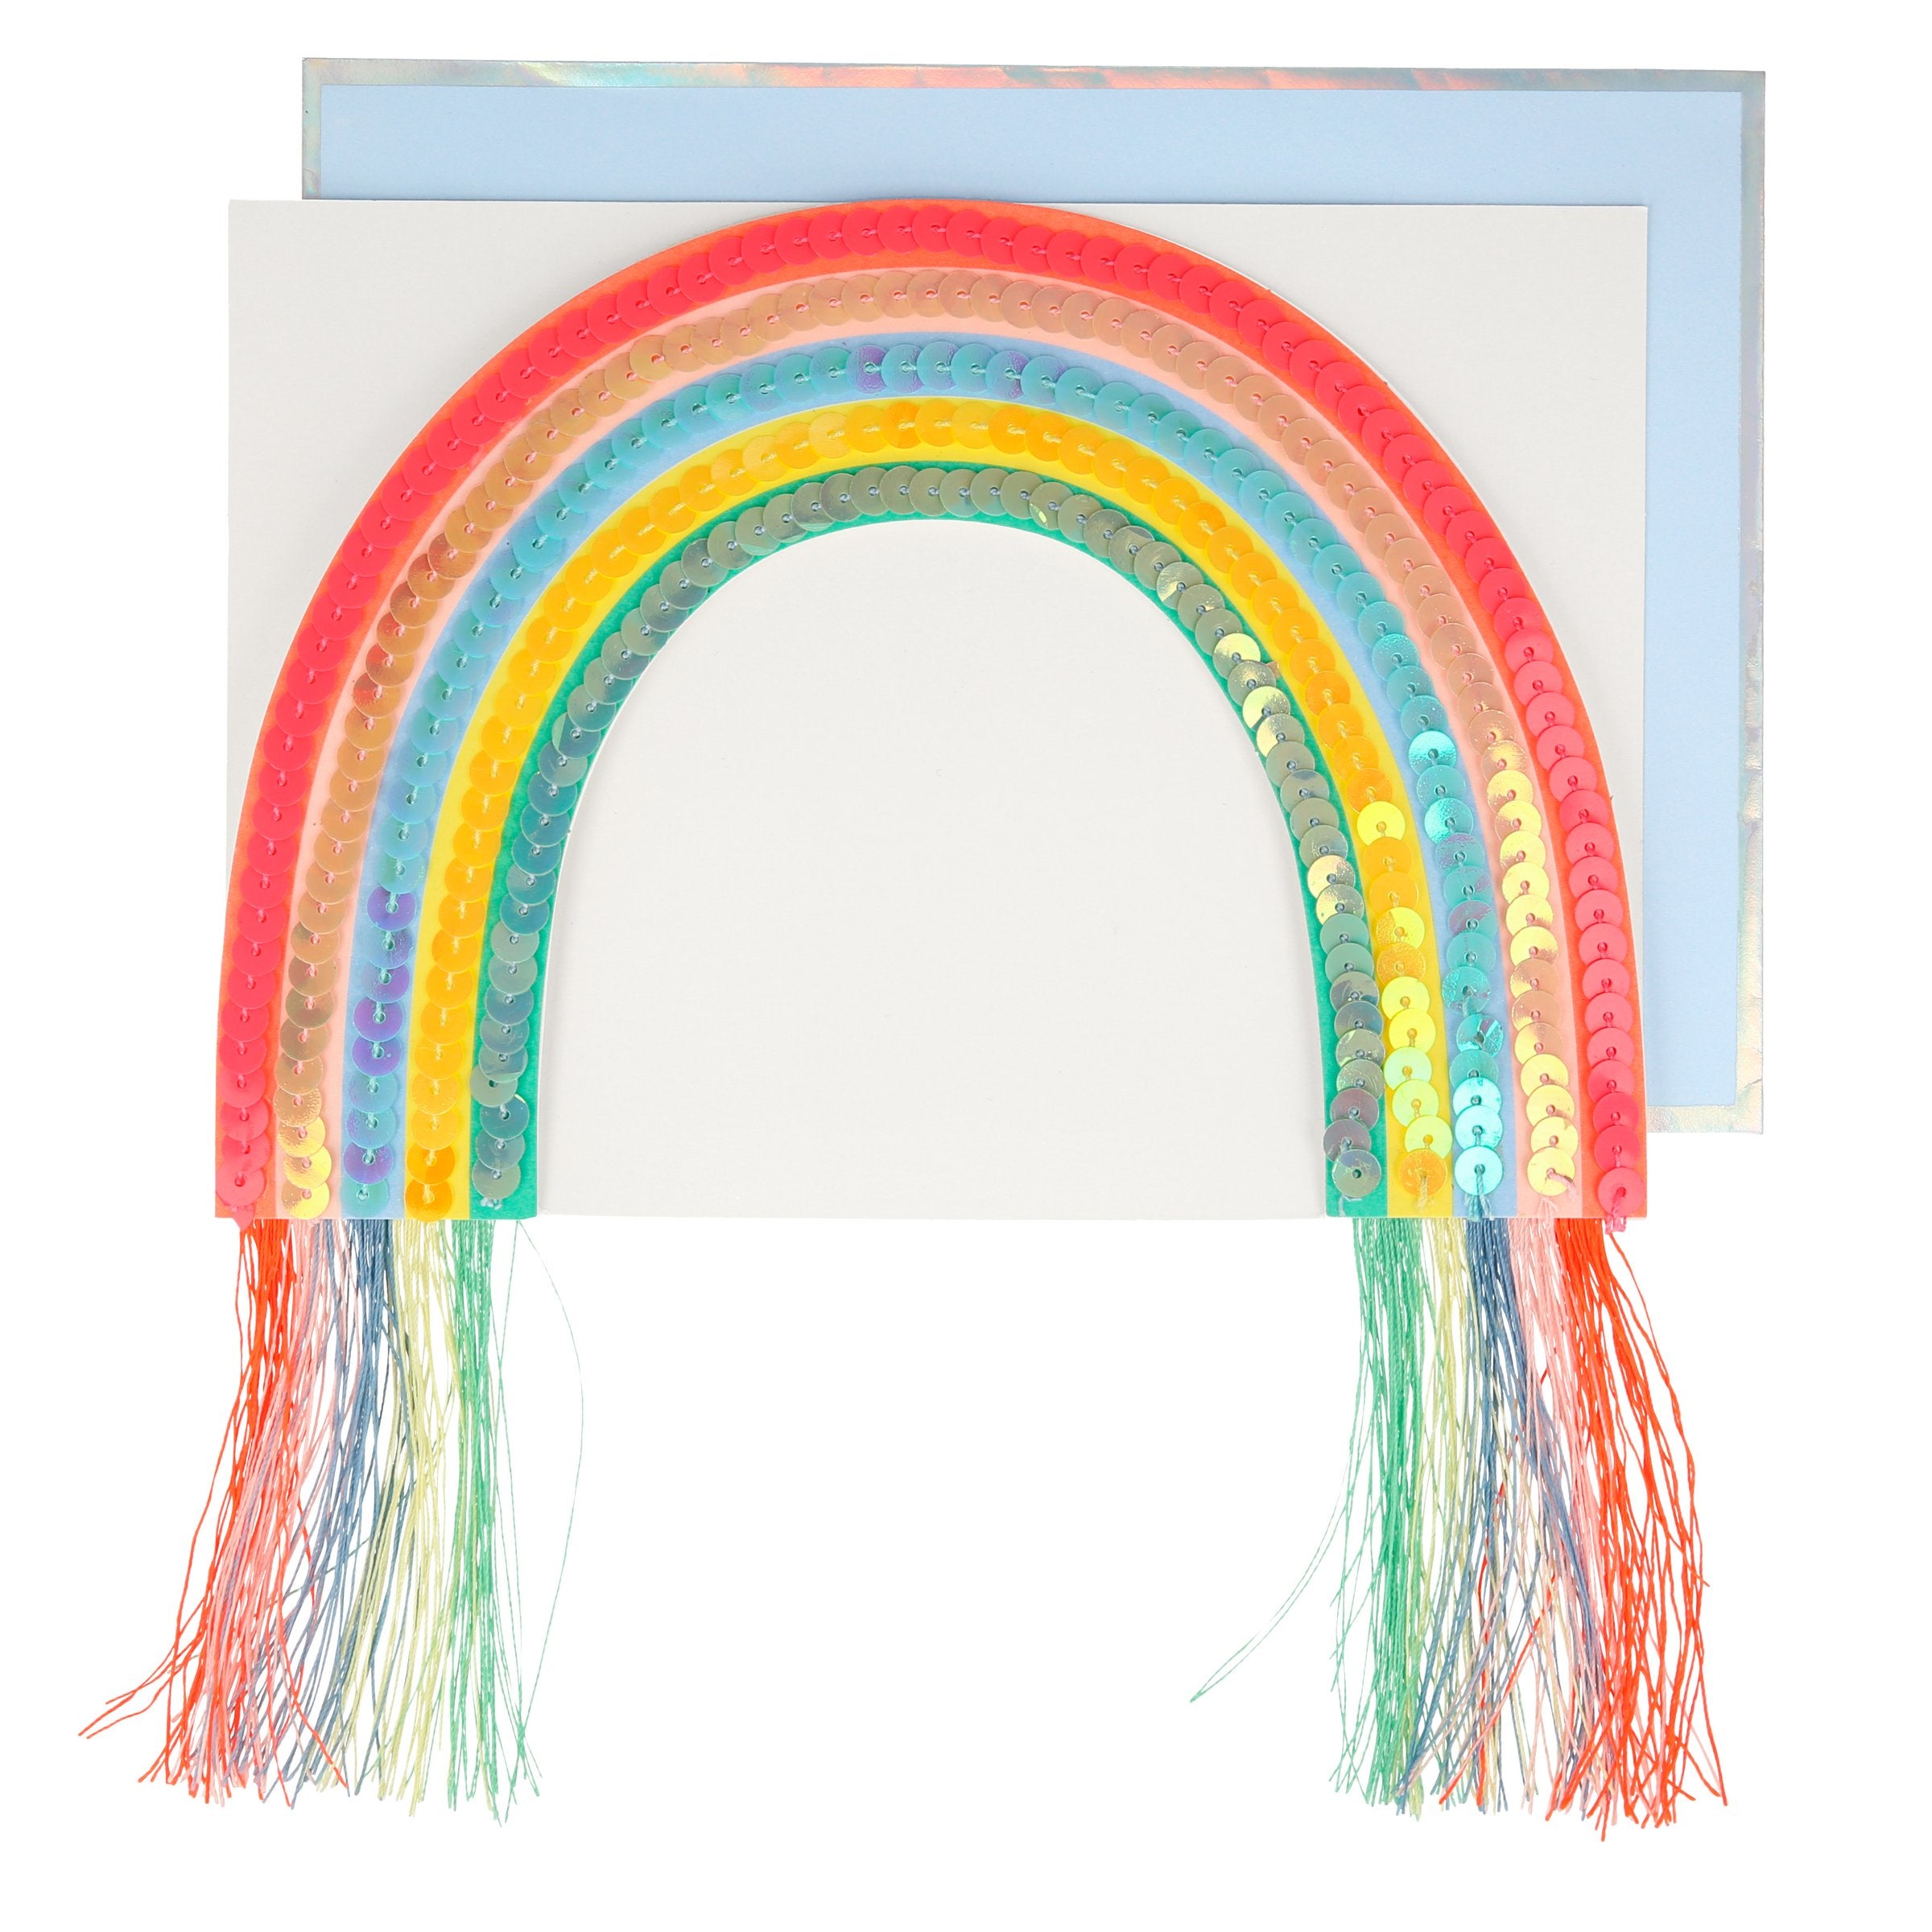 Our rainbow birthday card has stitched sequin tassels for a fabulous effect.